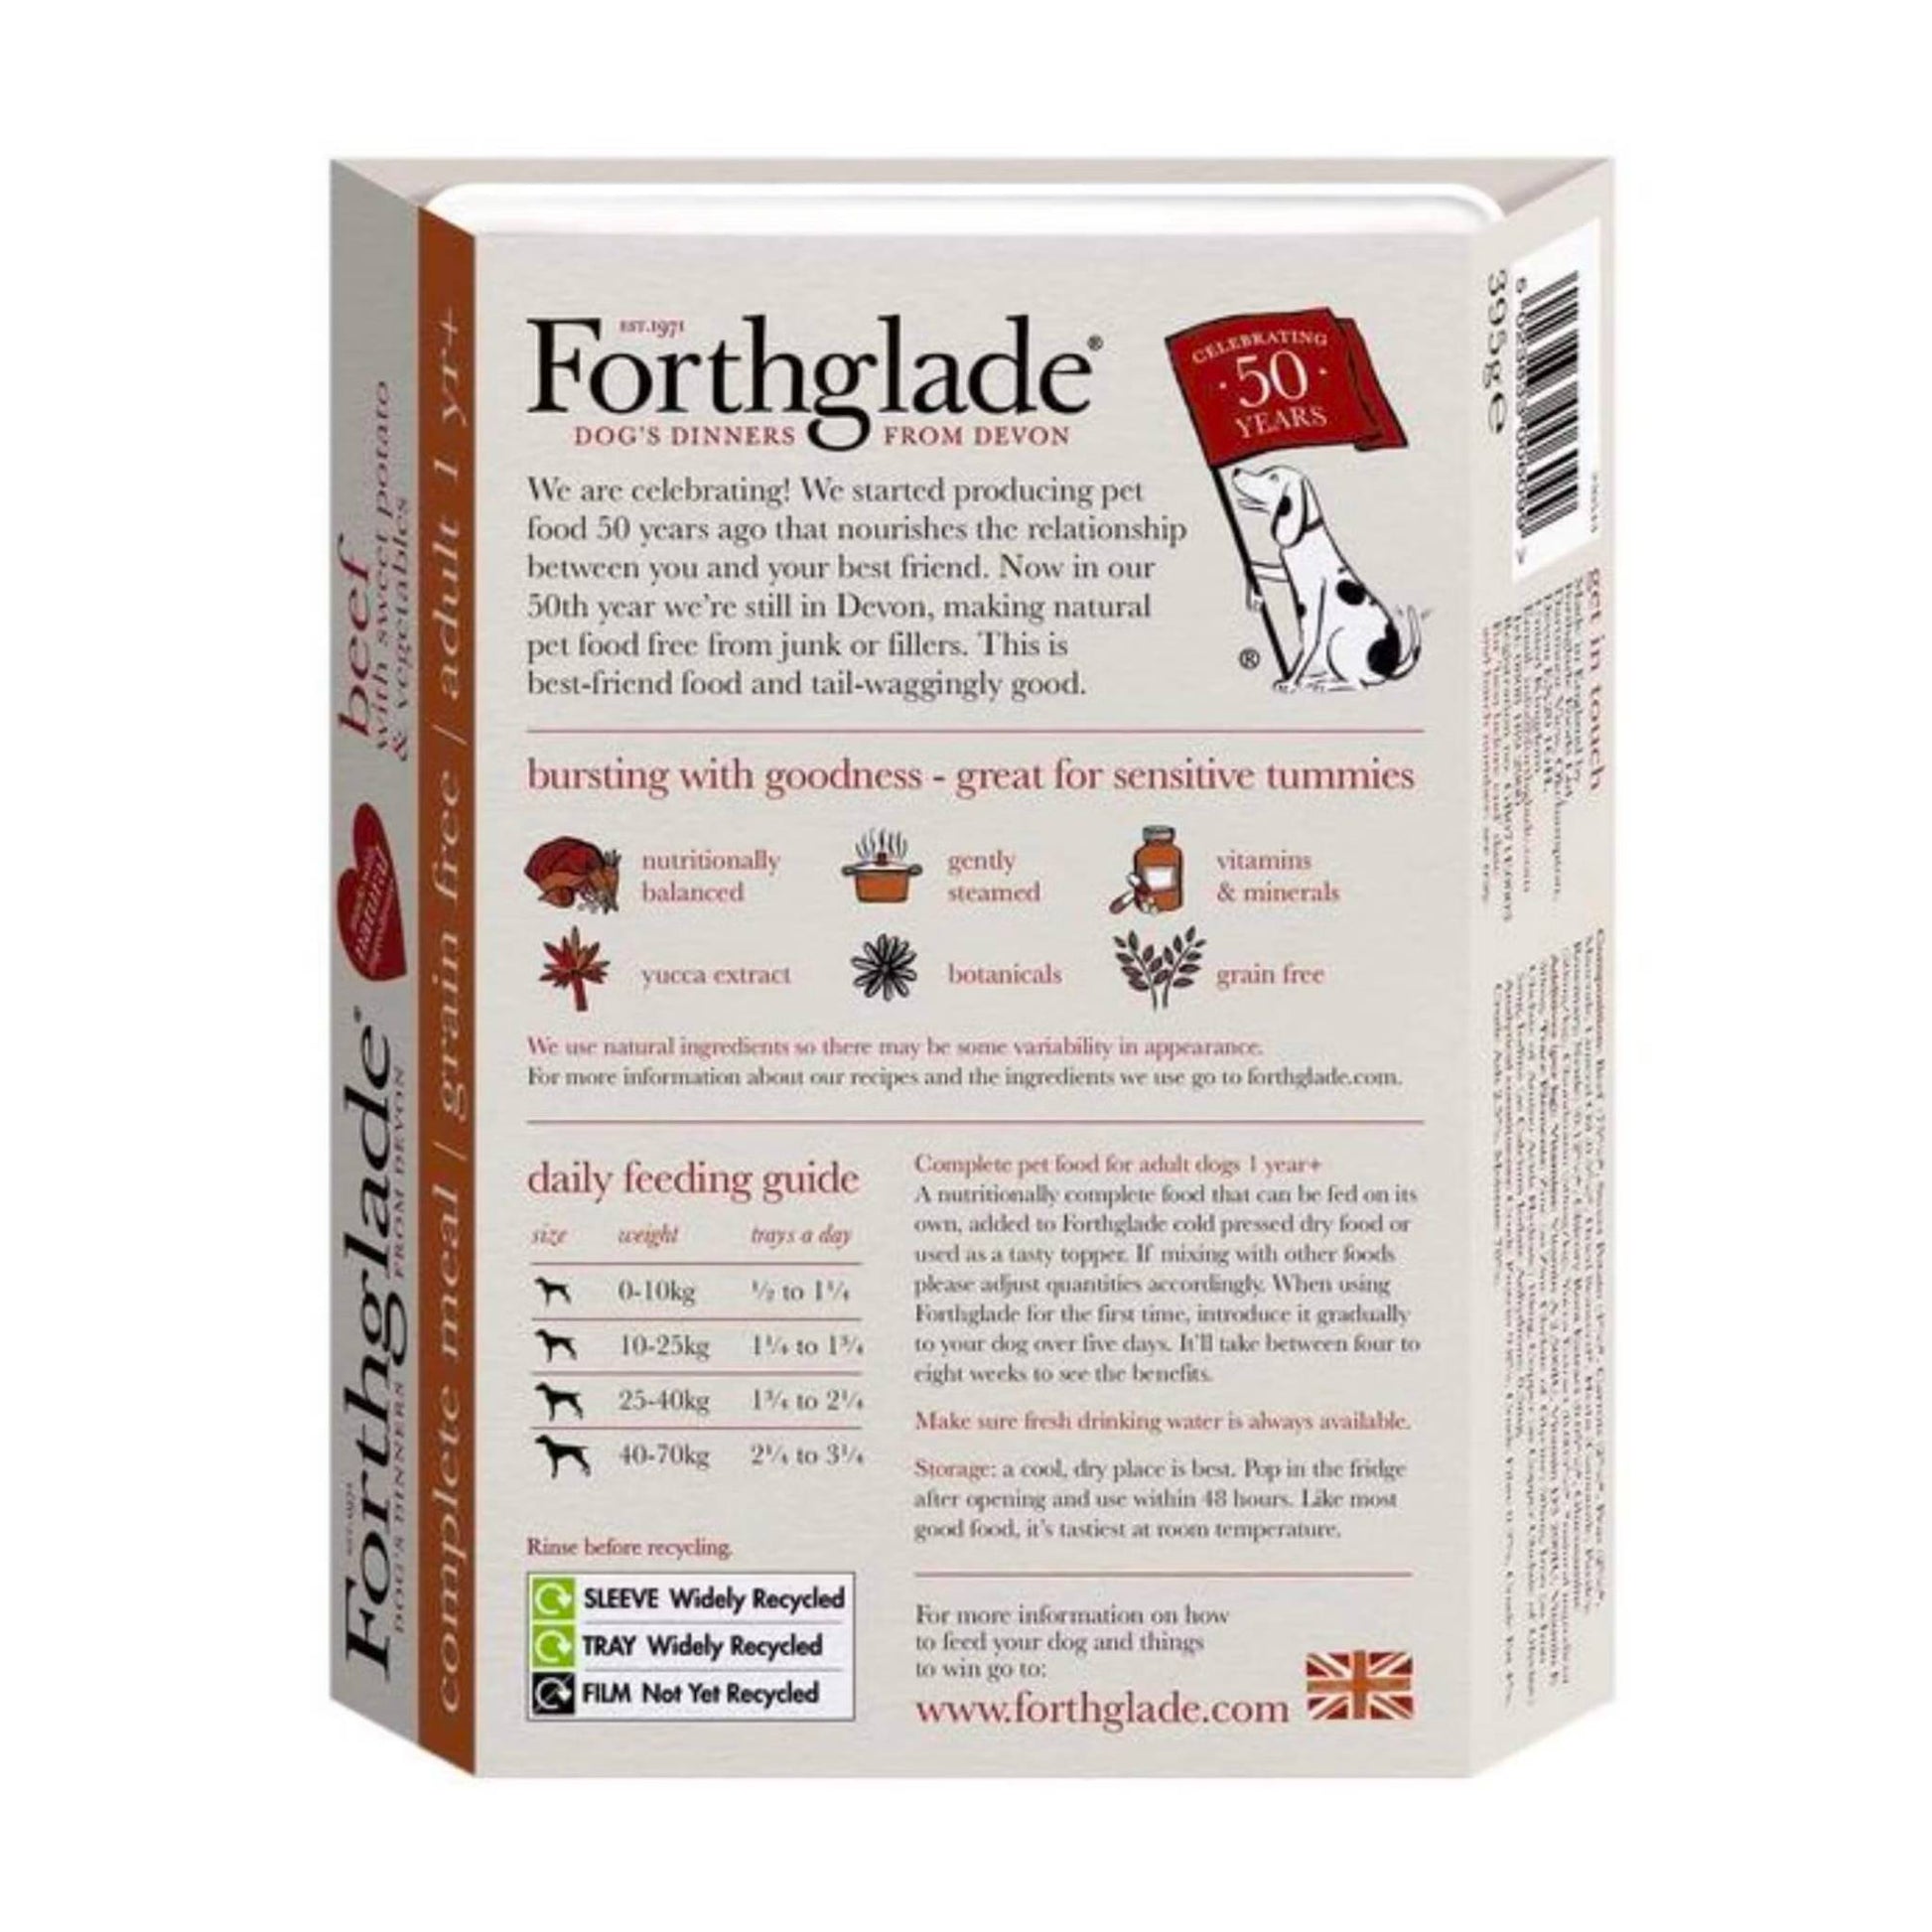 Forthglade complete beef adult dog food ingredients and feeding guide.